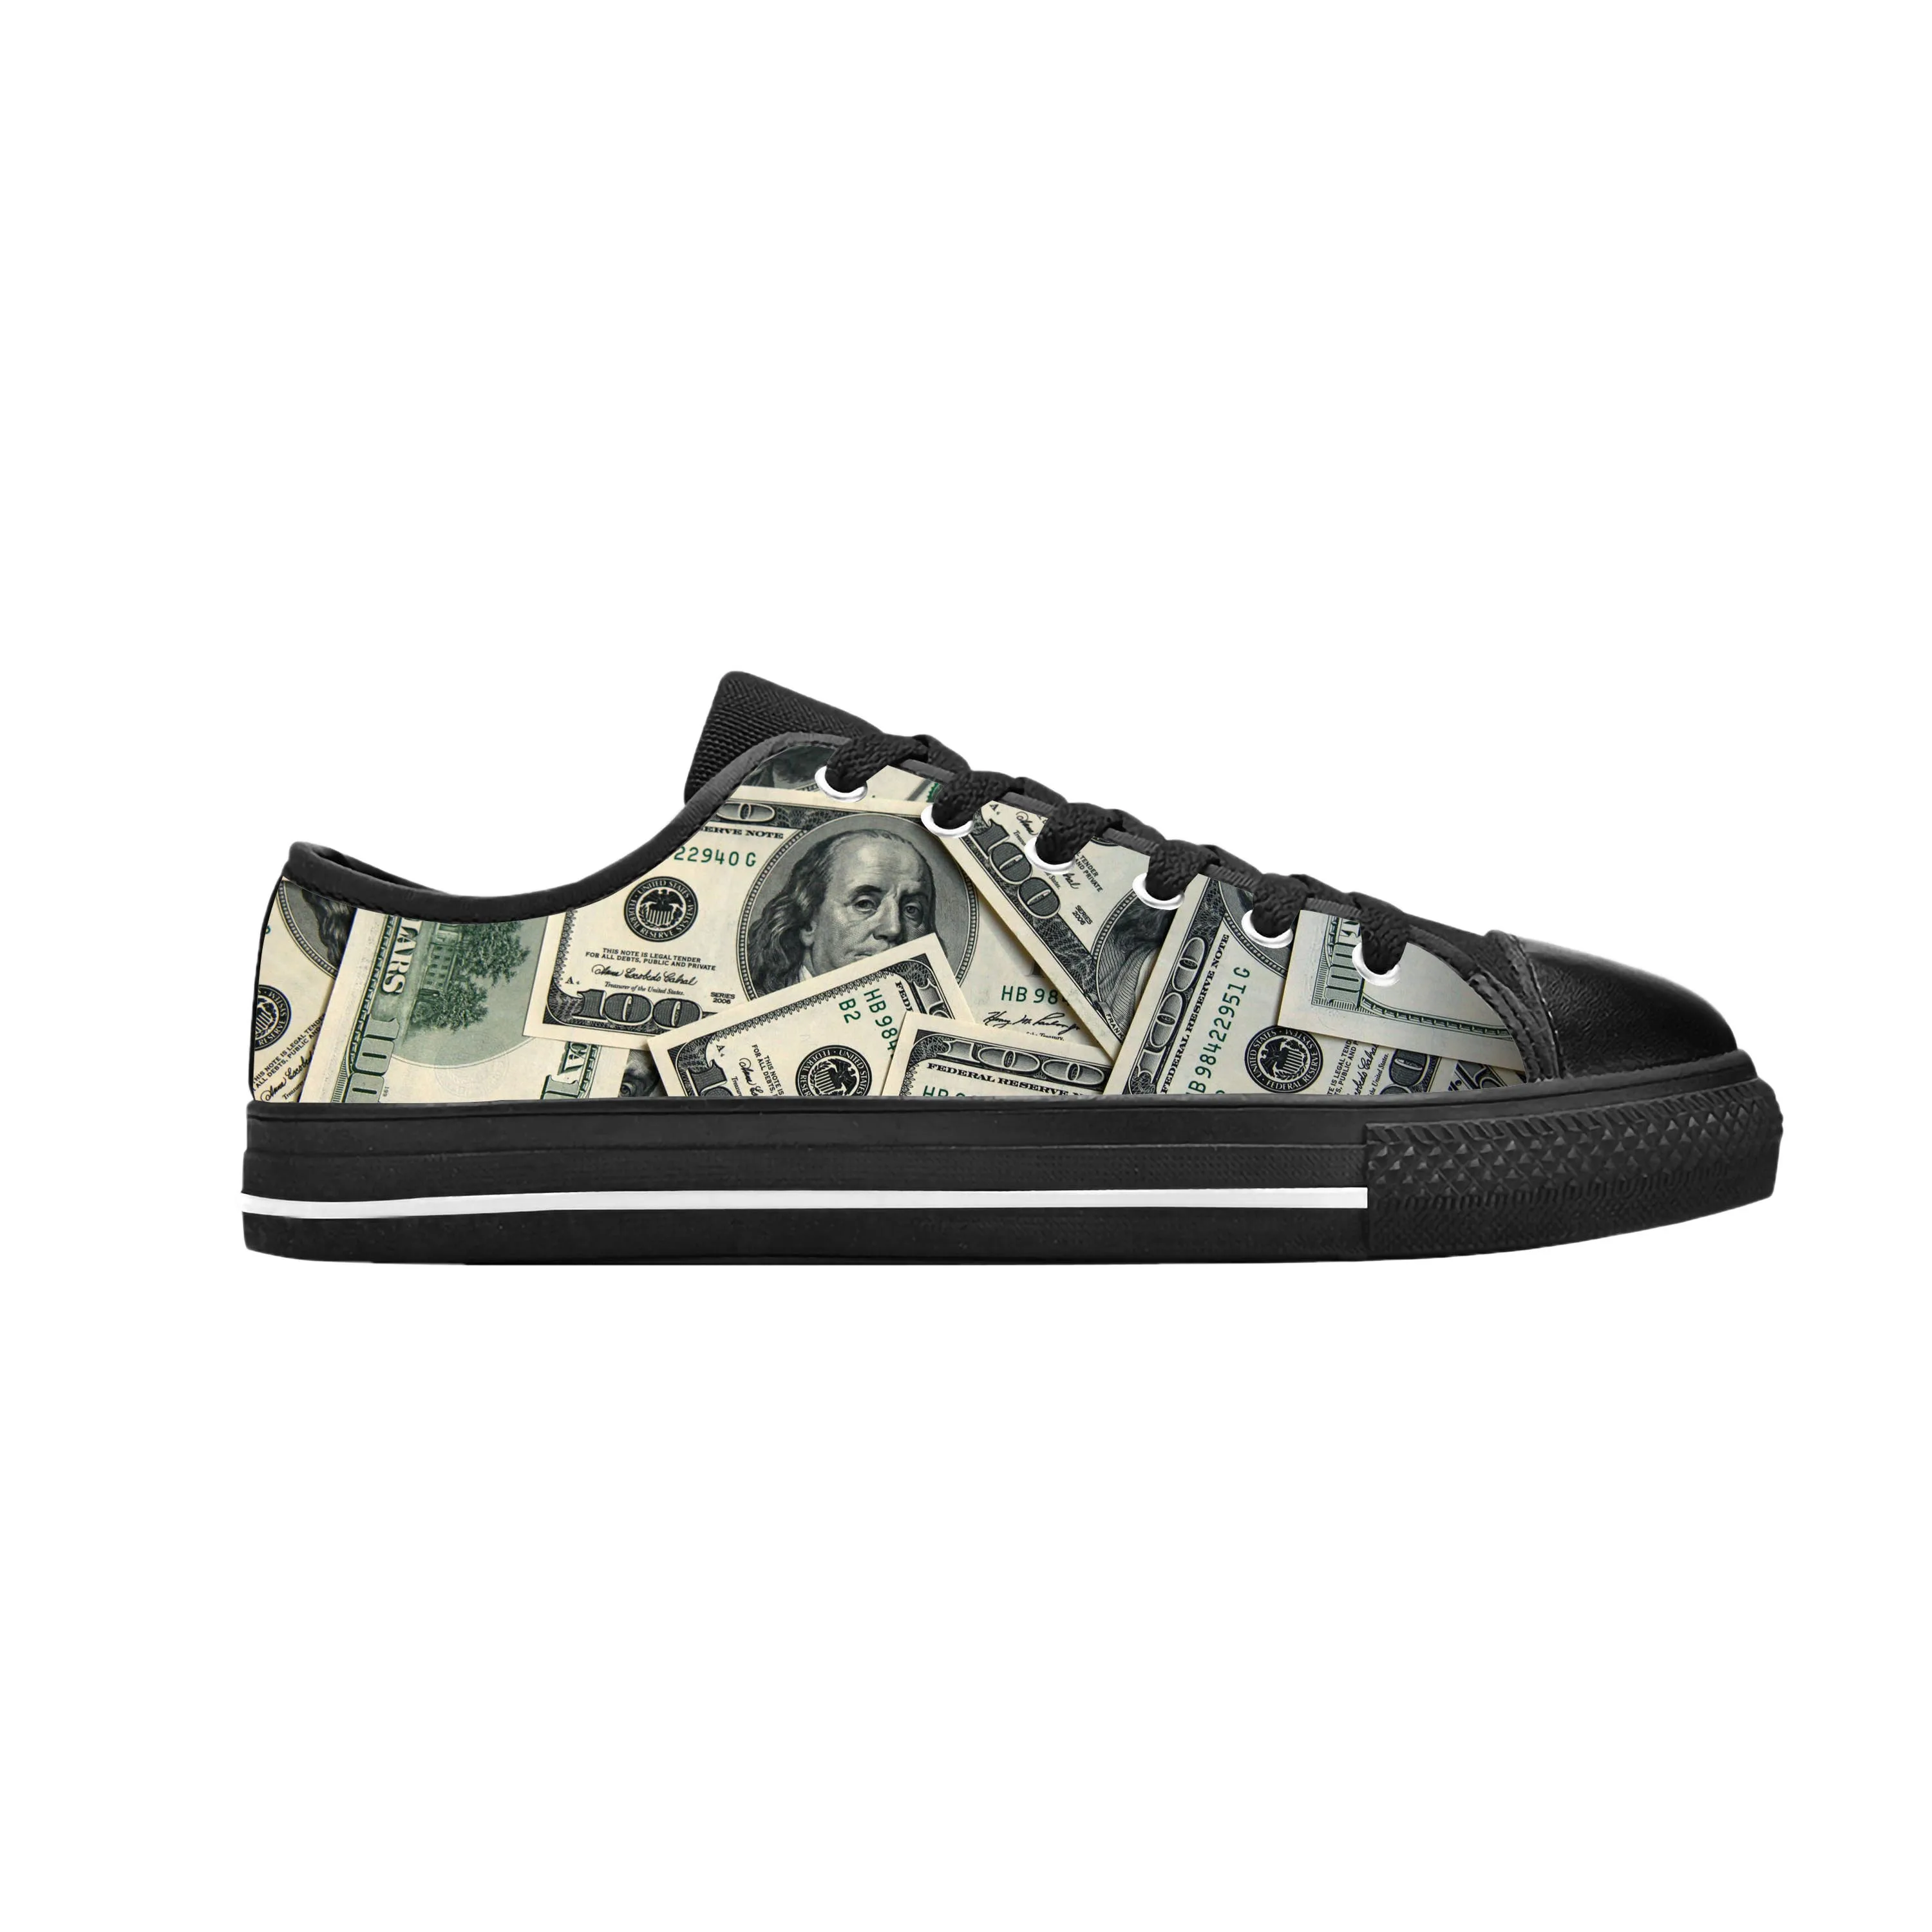 Gothic Dollar Bills Dollars Money Pattern Fashion Casual Cloth Shoes Low Top Comfortable Breathable 3D Print Men Women Sneakers blood bloody pattern horror halloween goth gothic casual cloth shoes high top comfortable breathable 3d print men women sneakers